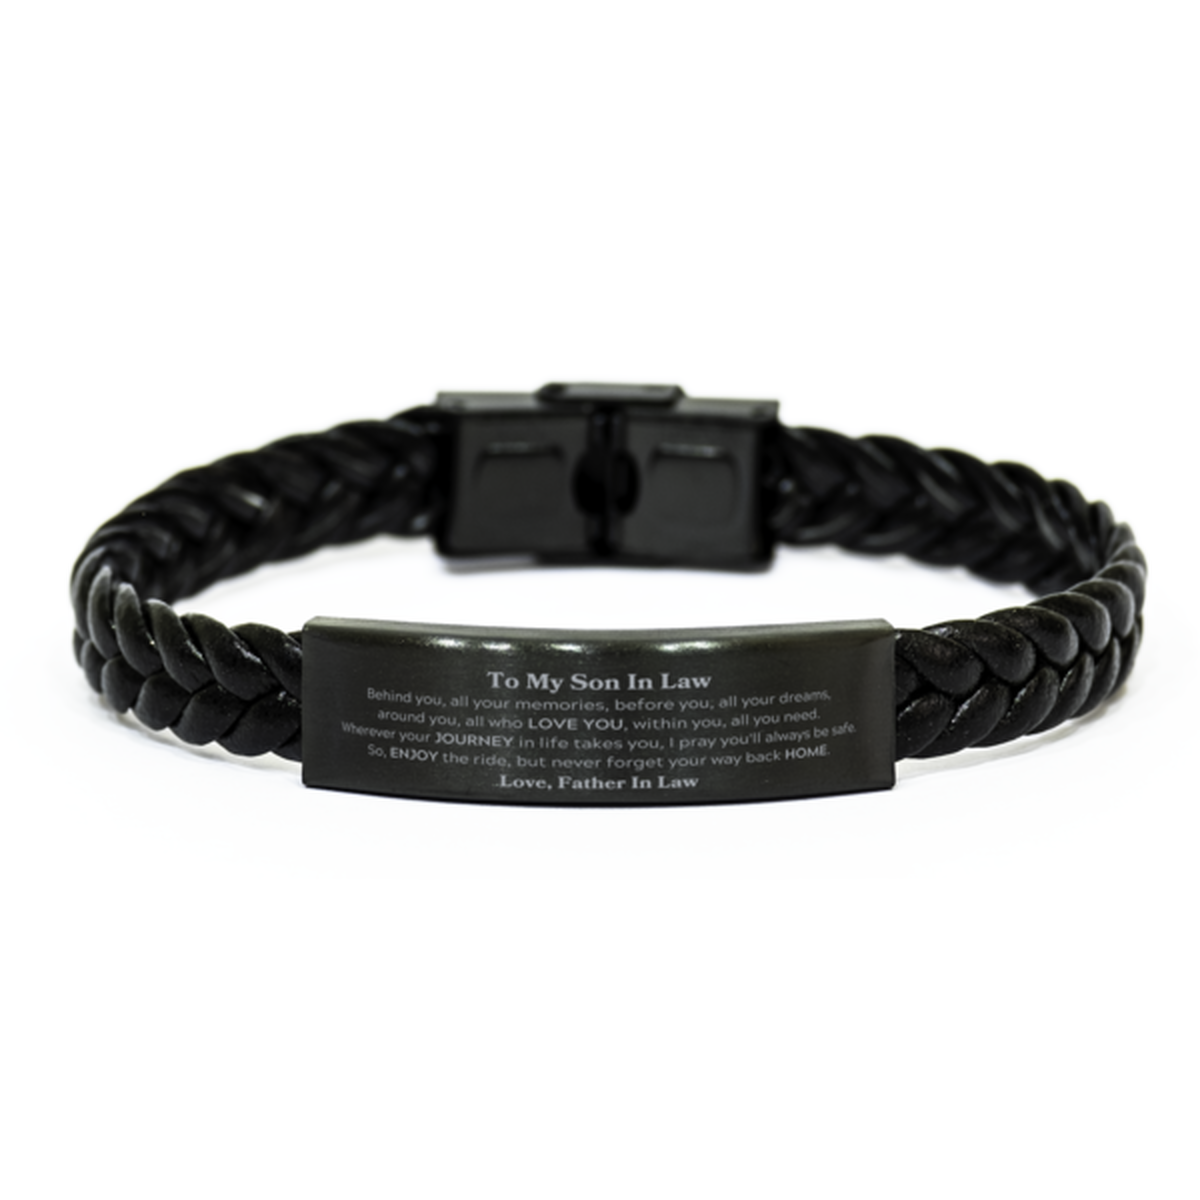 To My Son In Law Graduation Gifts from Father In Law, Son In Law Braided Leather Bracelet Christmas Birthday Gifts for Son In Law Behind you, all your memories, before you, all your dreams. Love, Father In Law